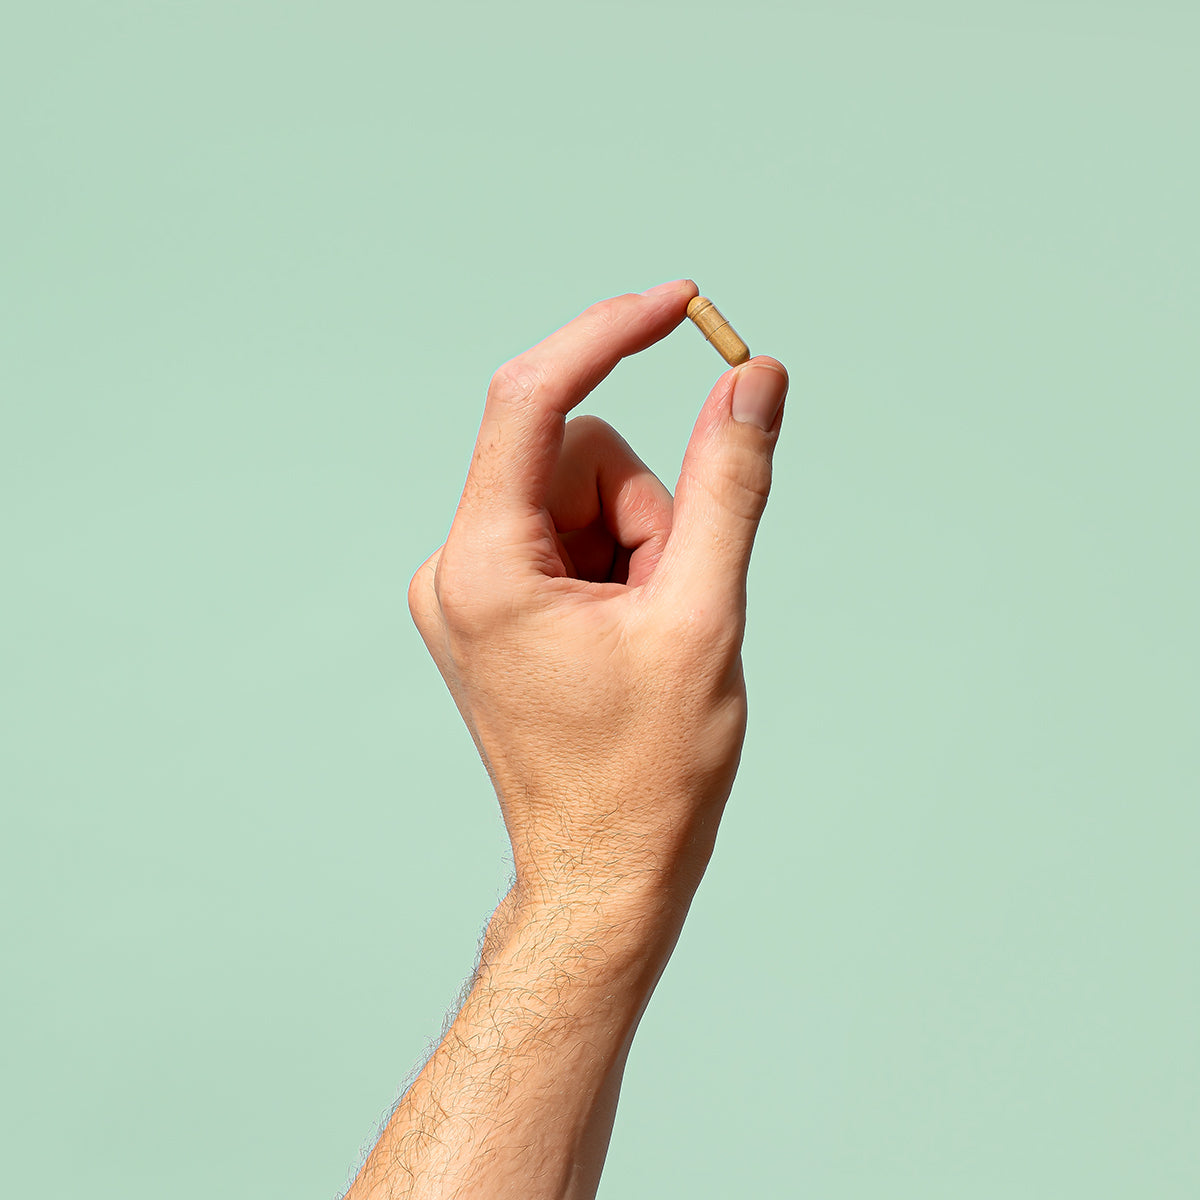 Man holding a Good Hair Multivitamin between thumb and index fingers